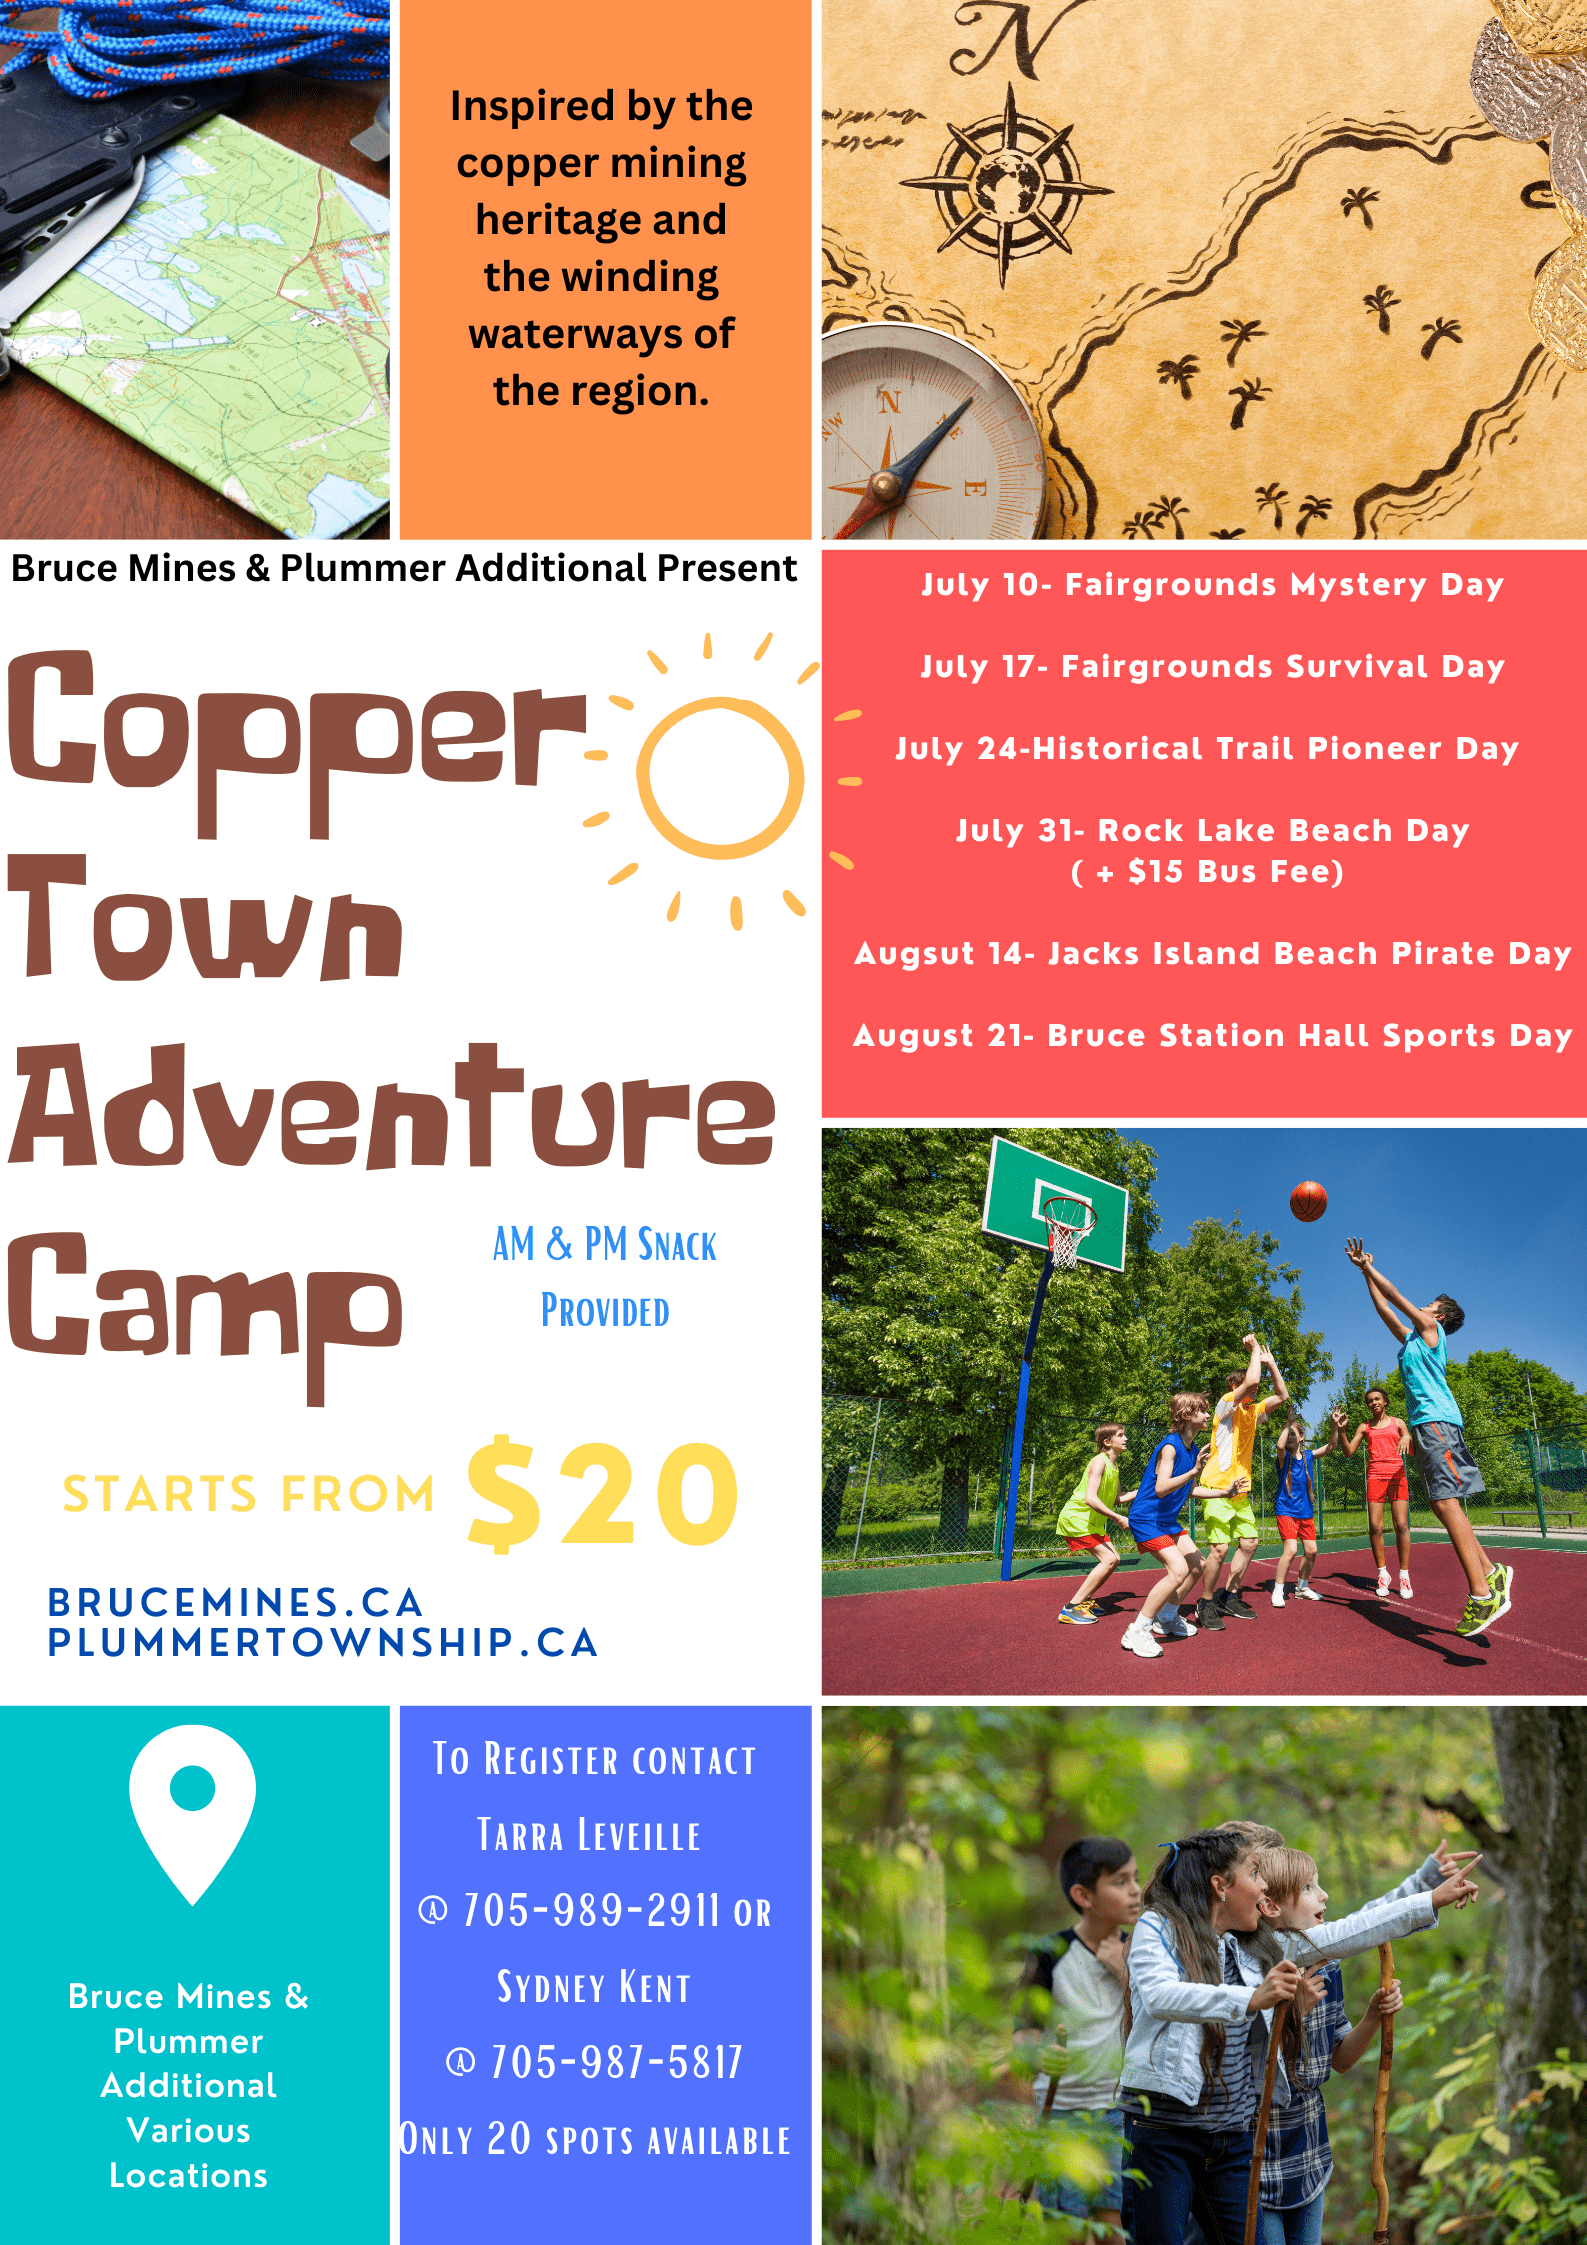 Copper Town Adventure Camp - July 17